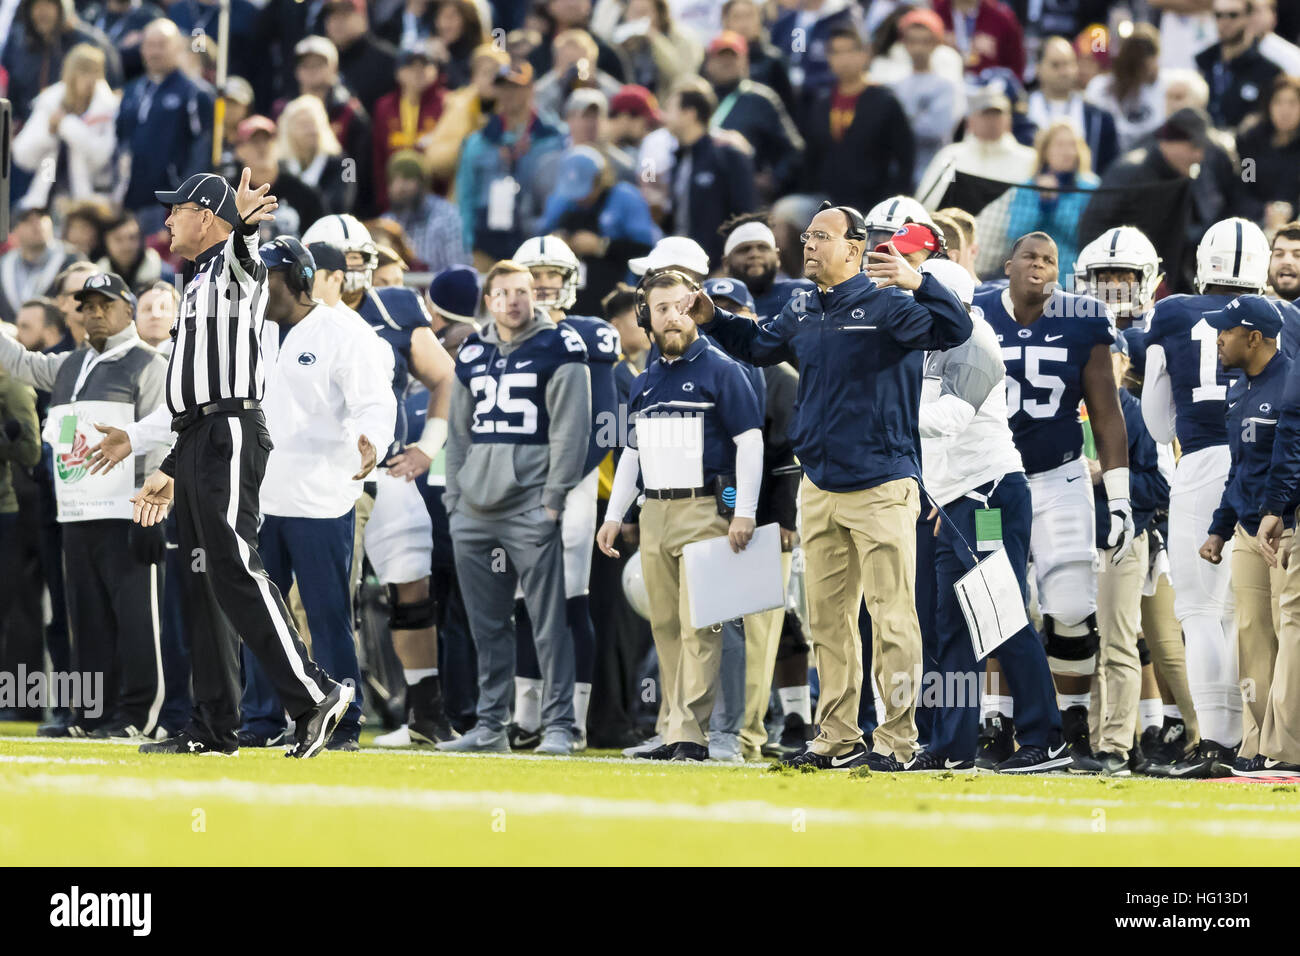 California, USA. 2nd Jan, 2017.  Penn State head coach James Franklin not happy with a call in the second half during the Rose Bowl Game between Penn State Nittany Lions and University of Southern California Trojans at Rose Bowl Stadium in Pasadena, California. USC won 52-49. © Scott Taetsch/ZUMA Wire/Alamy Live News Stock Photo